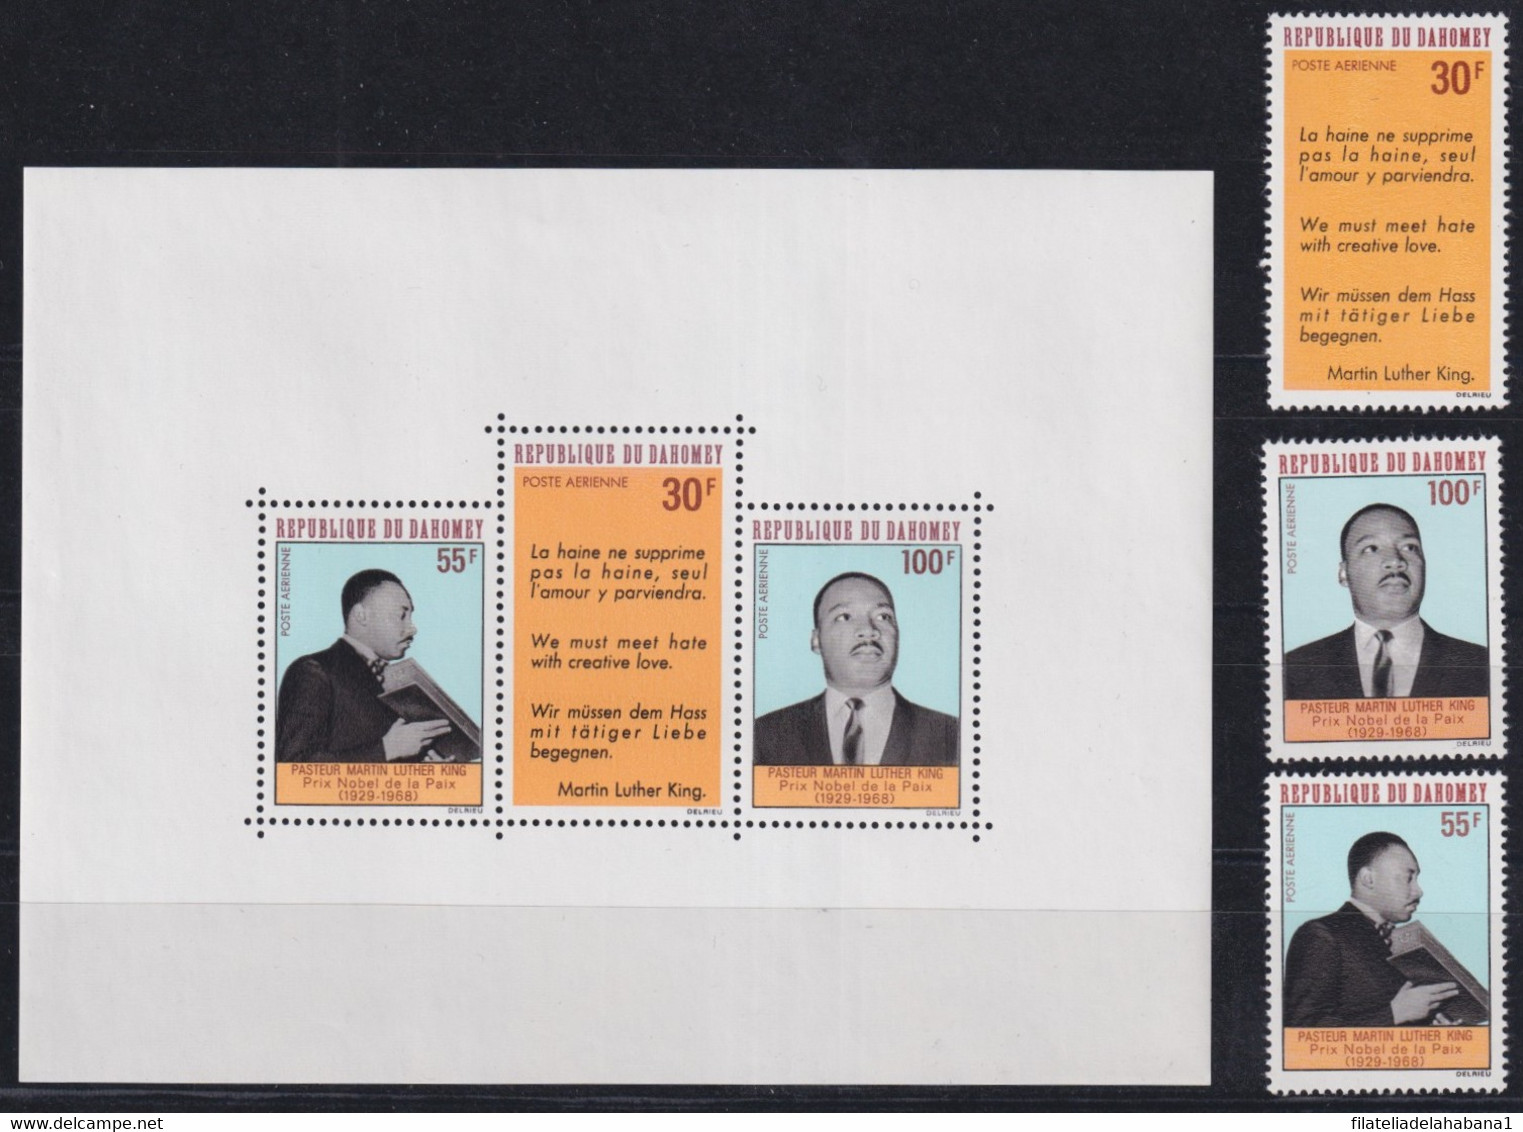 F-EX31932 DAHOMEY MNH 1968 PEACE MARTIN LUTHER KING SHEET SHEET + SET. - Martin Luther King